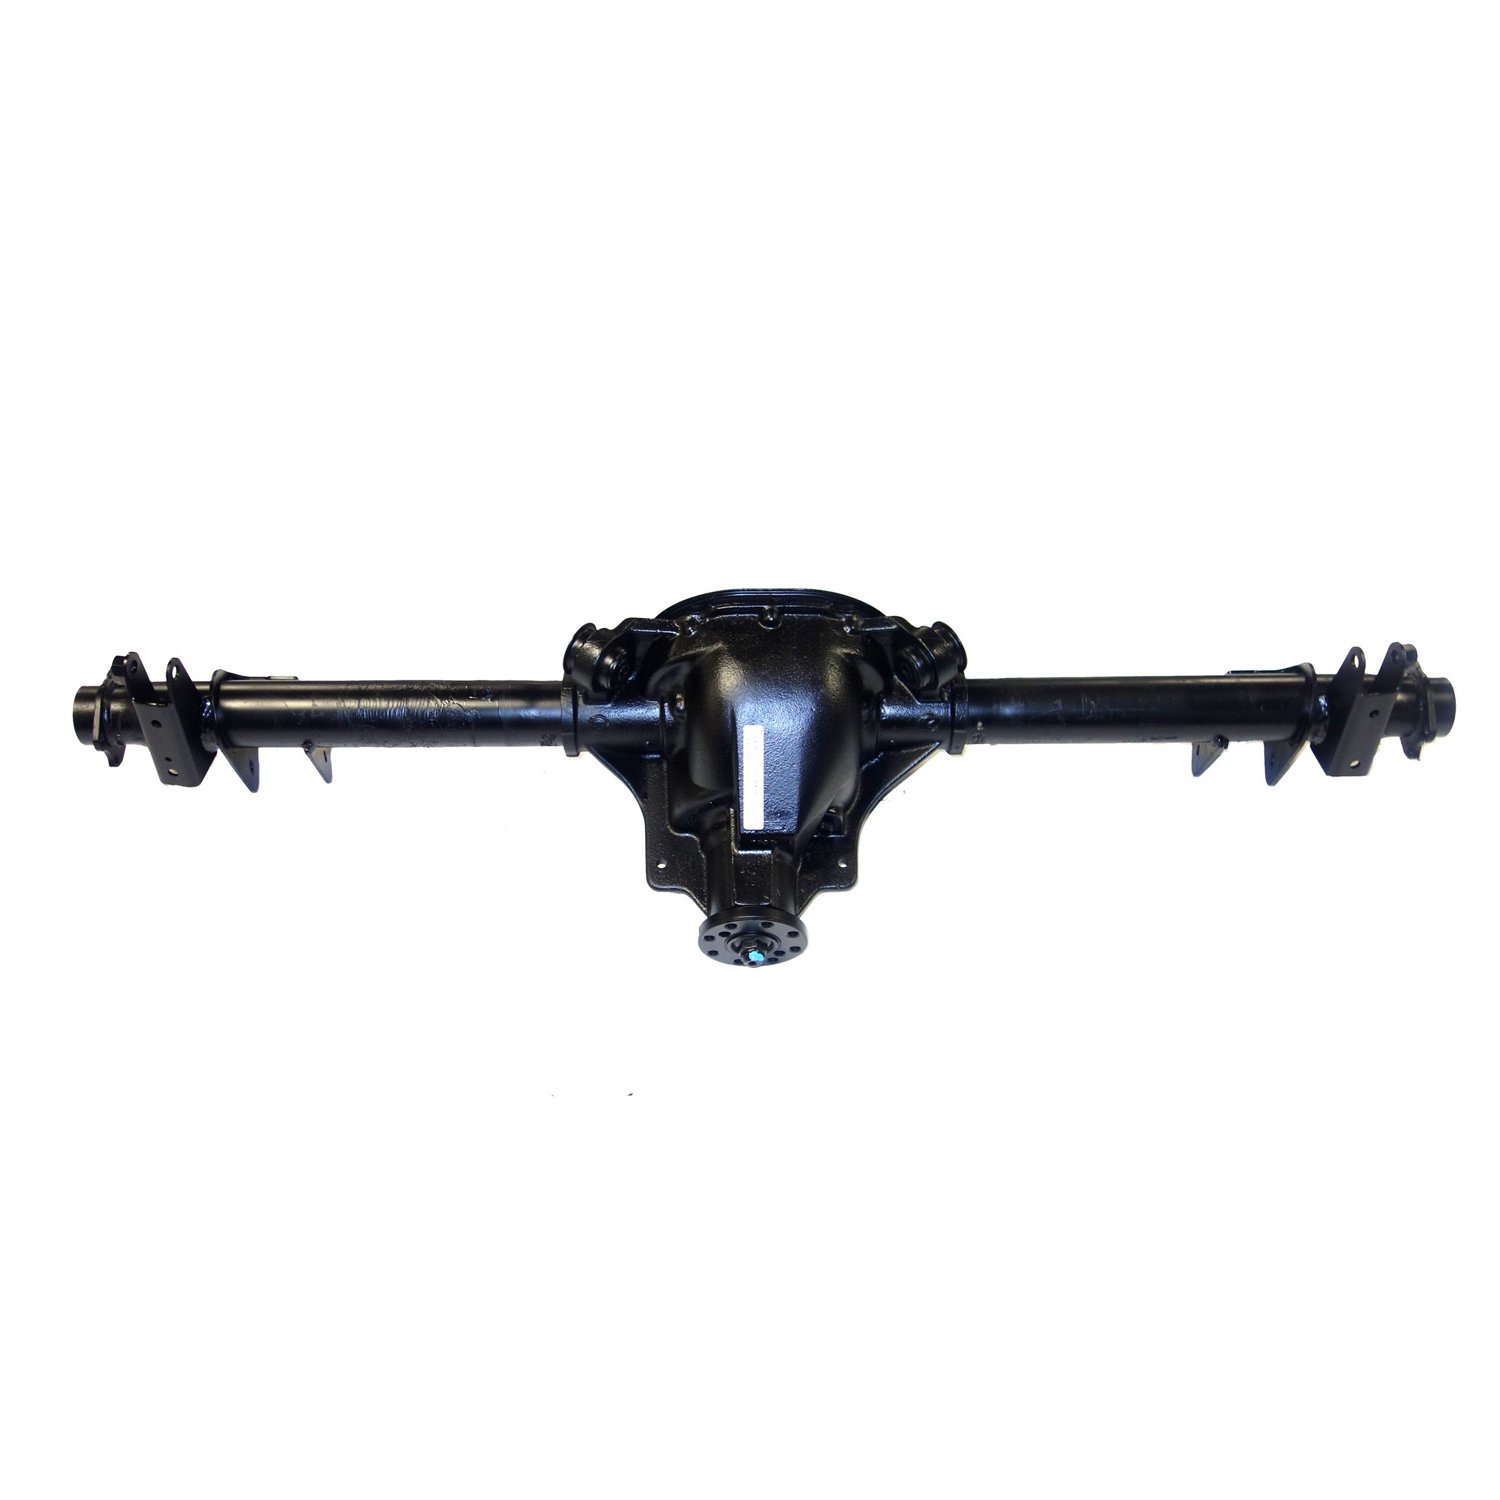 Remanufactured Complete Axle Assembly for 8.8" 86-93 Mustang 3.08 , Drum Brakes, Posi LSD